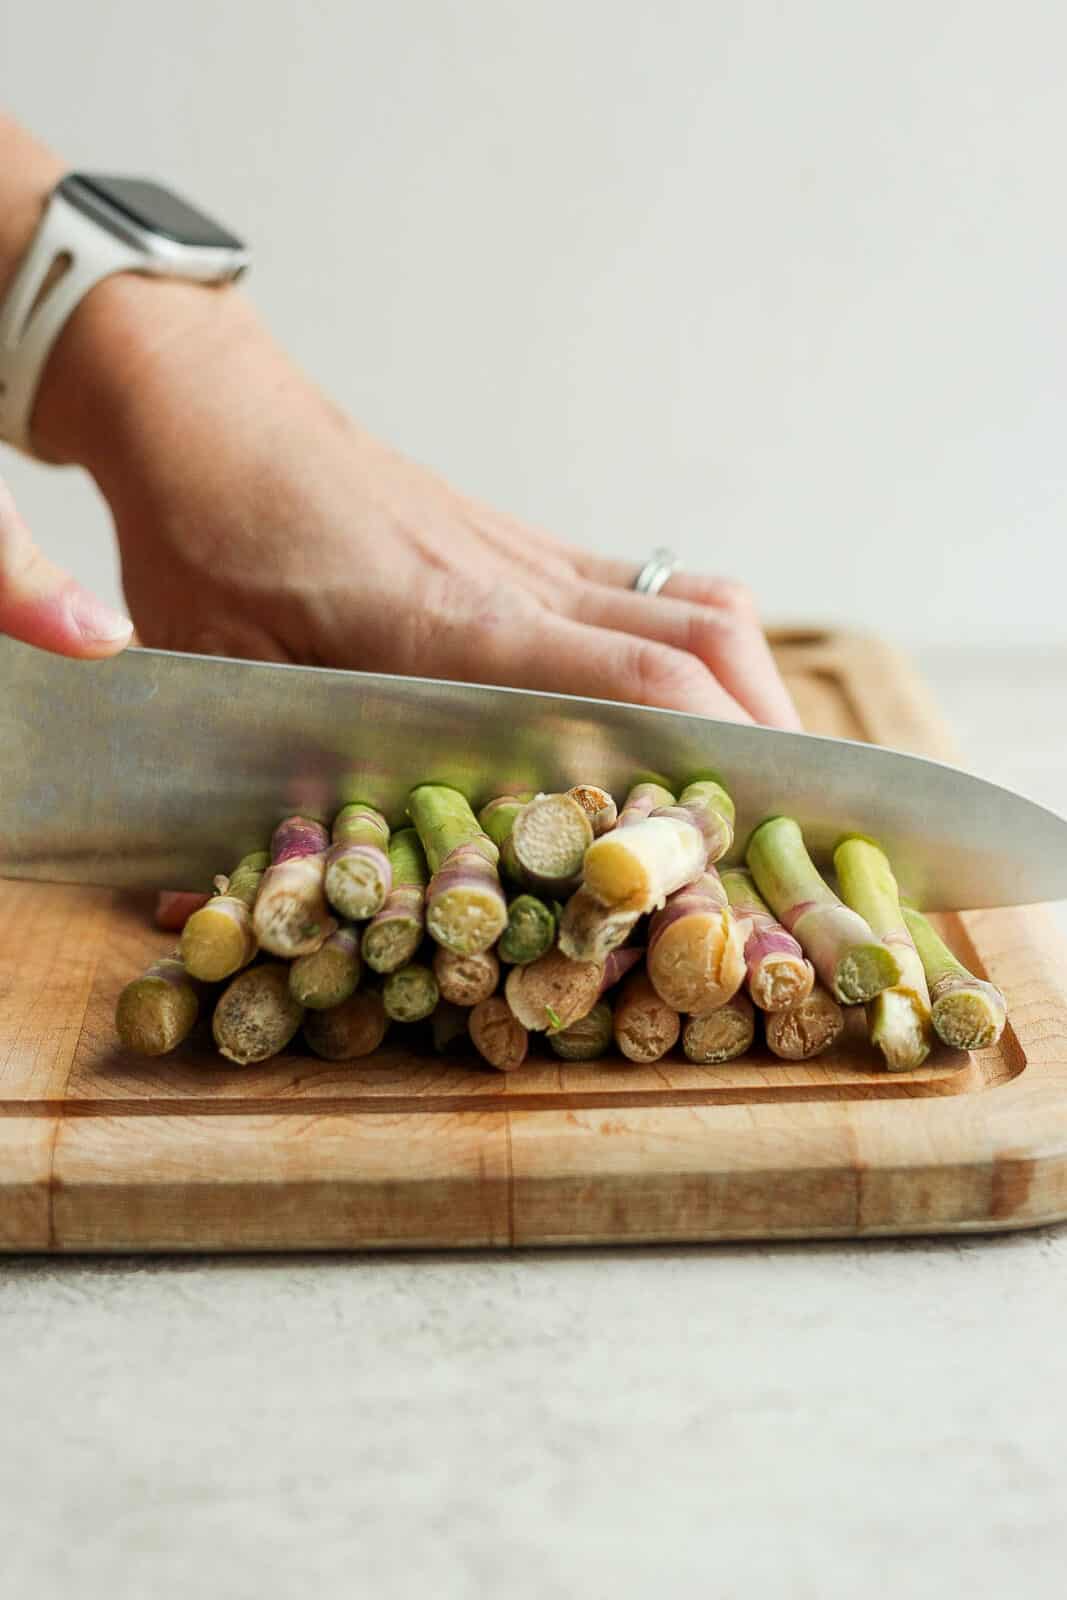 The ends of a bunch of asparagus being cut off with a knife on a wood cutting board.